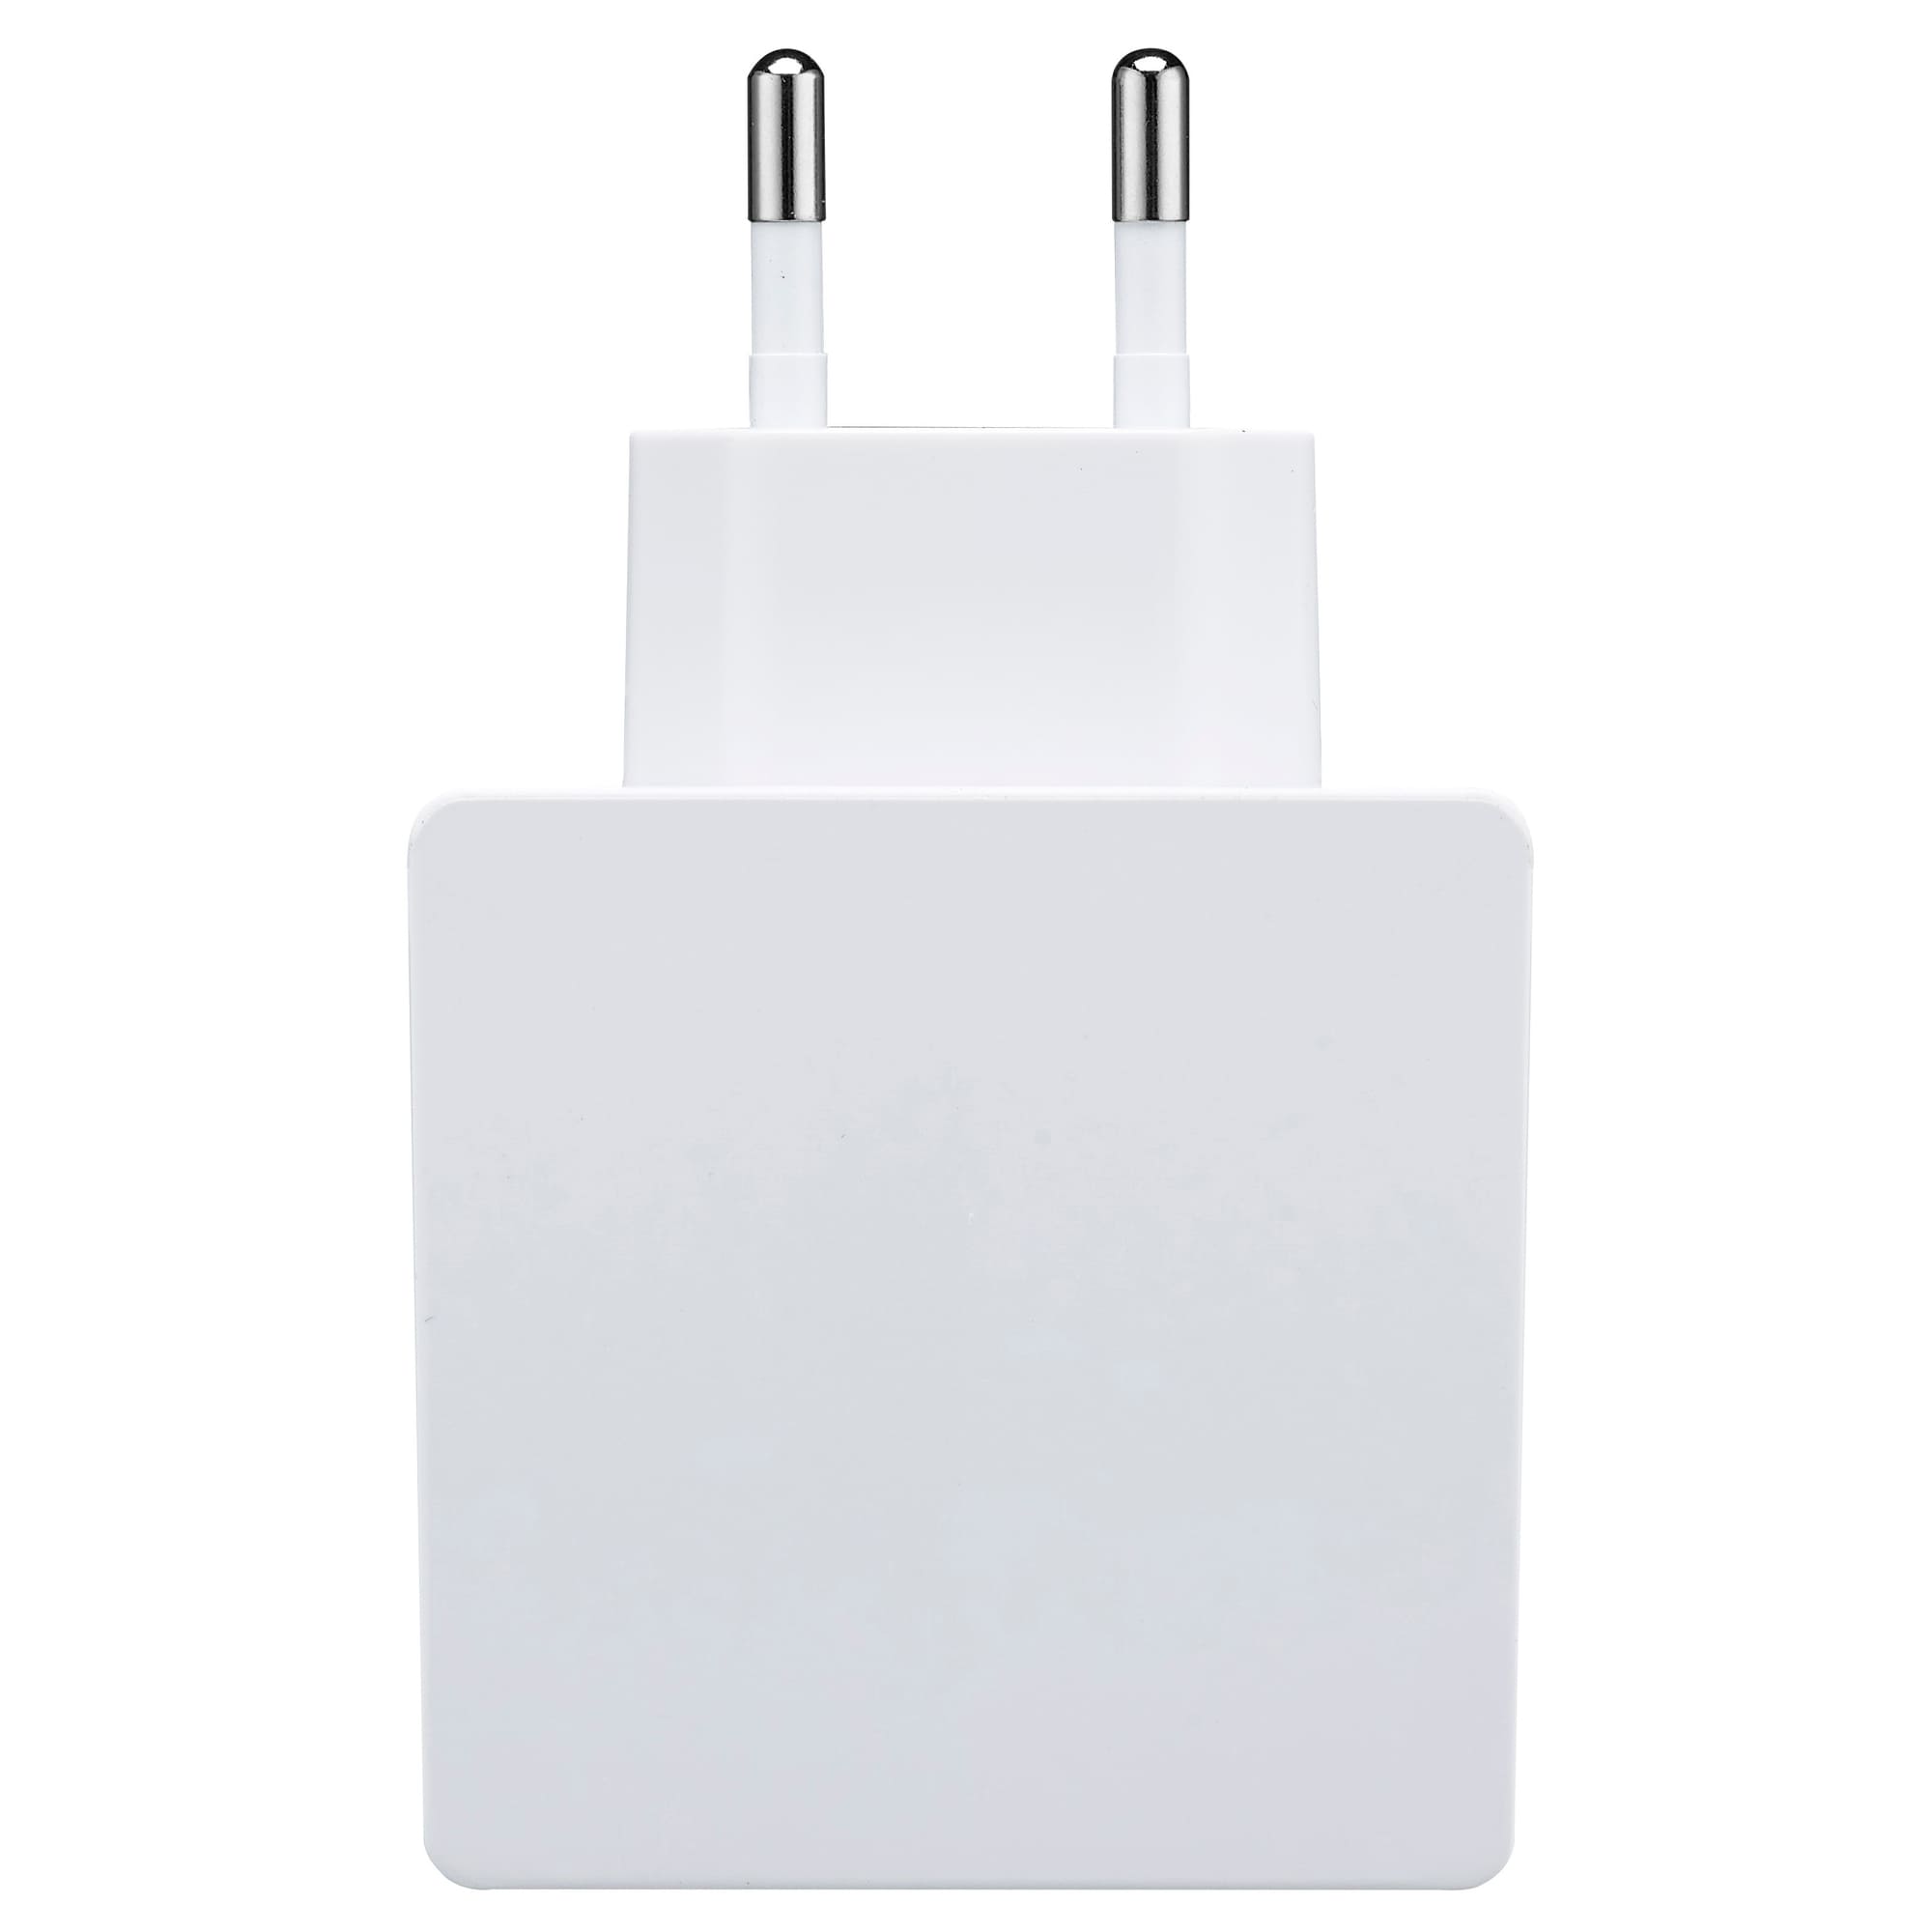 Sandstrøm Wall Charger 4 Ports 5.1A Whit